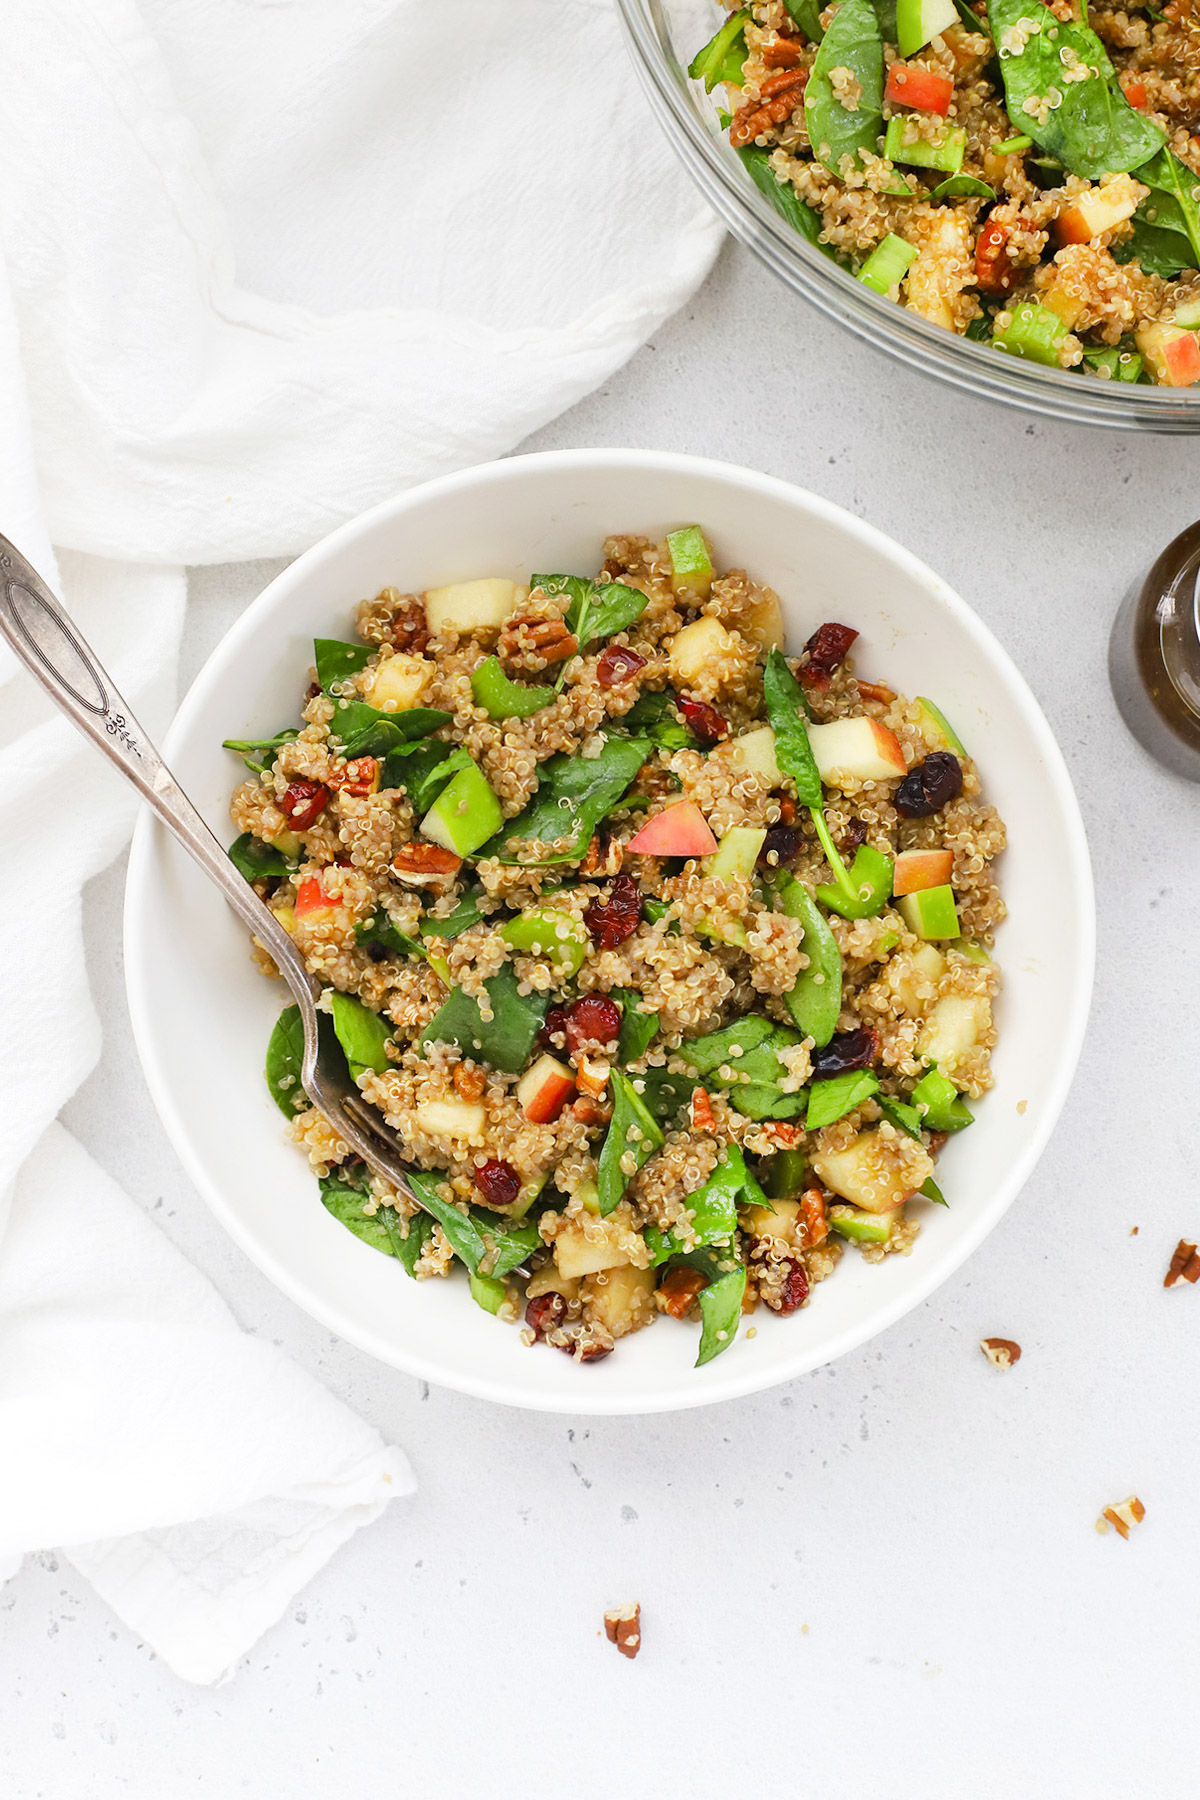 Overhead view of a bowl of healthy powerhouse quinoa salad with balsamic dressing